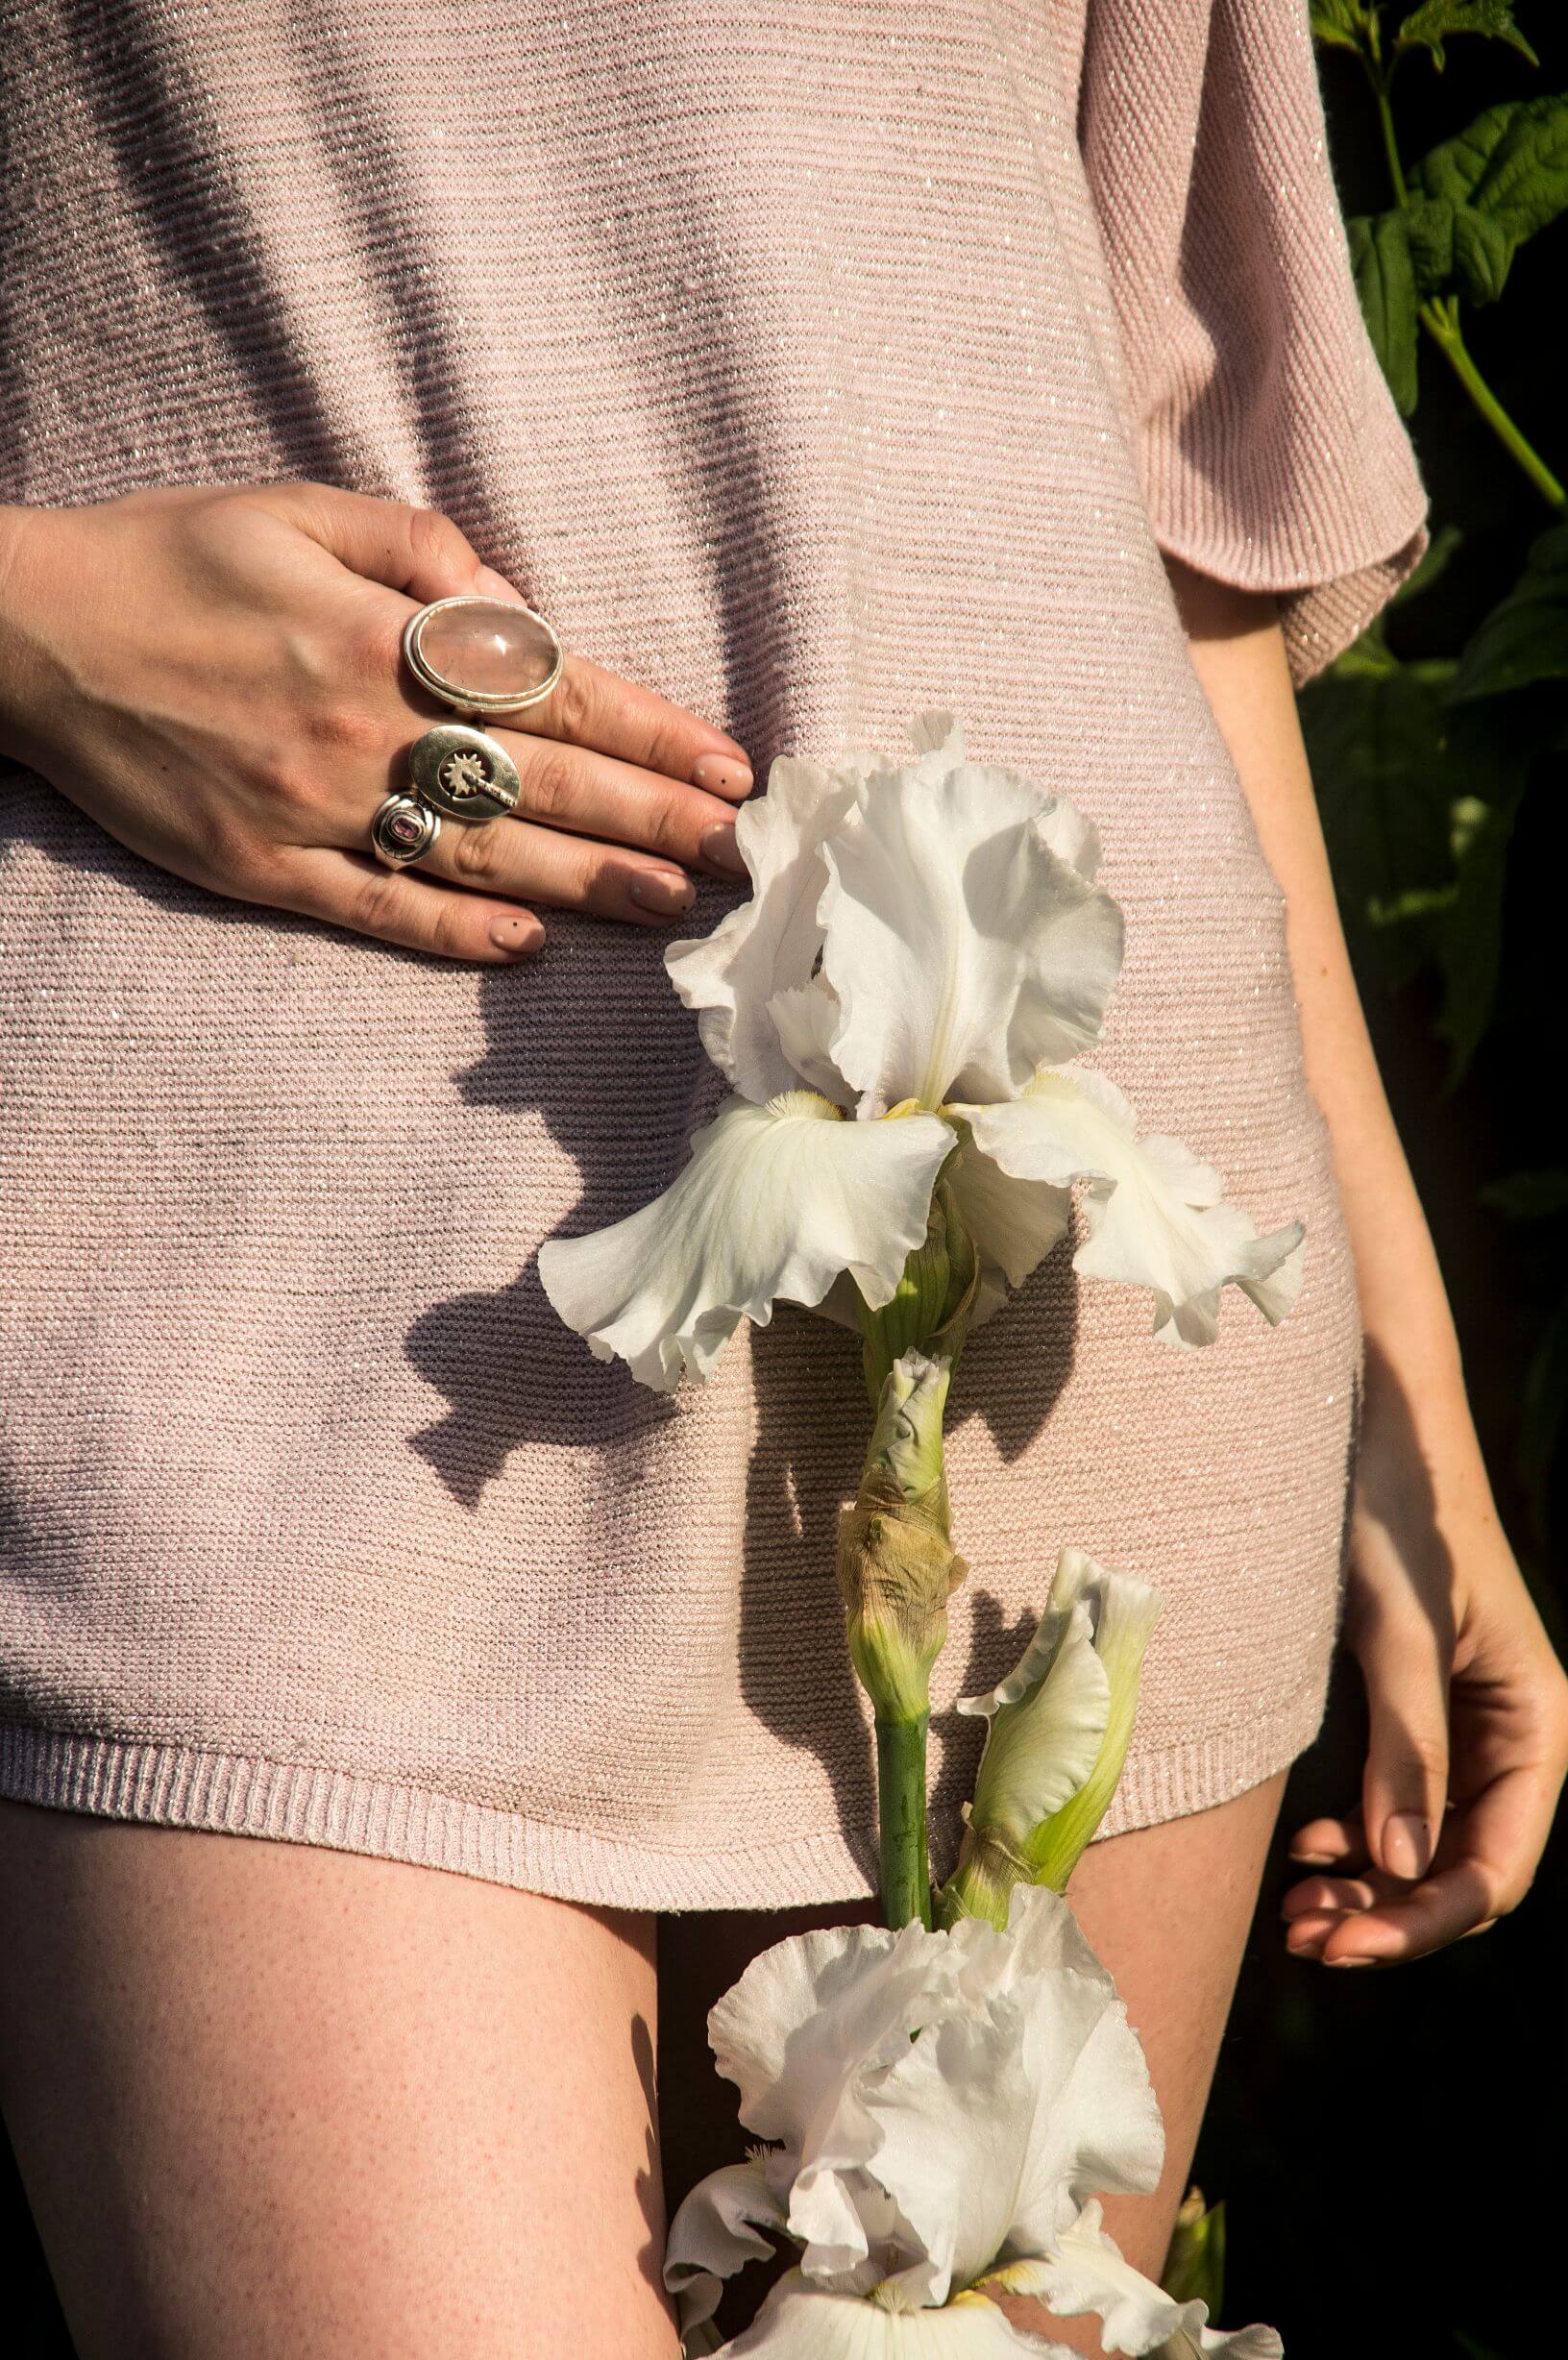 A close up of a woman's abdominal and pelvic regions. The woman is wearing an oversize beige knitted top. A white flower extends upwards from the bottom of the frame to where her uterus would be.